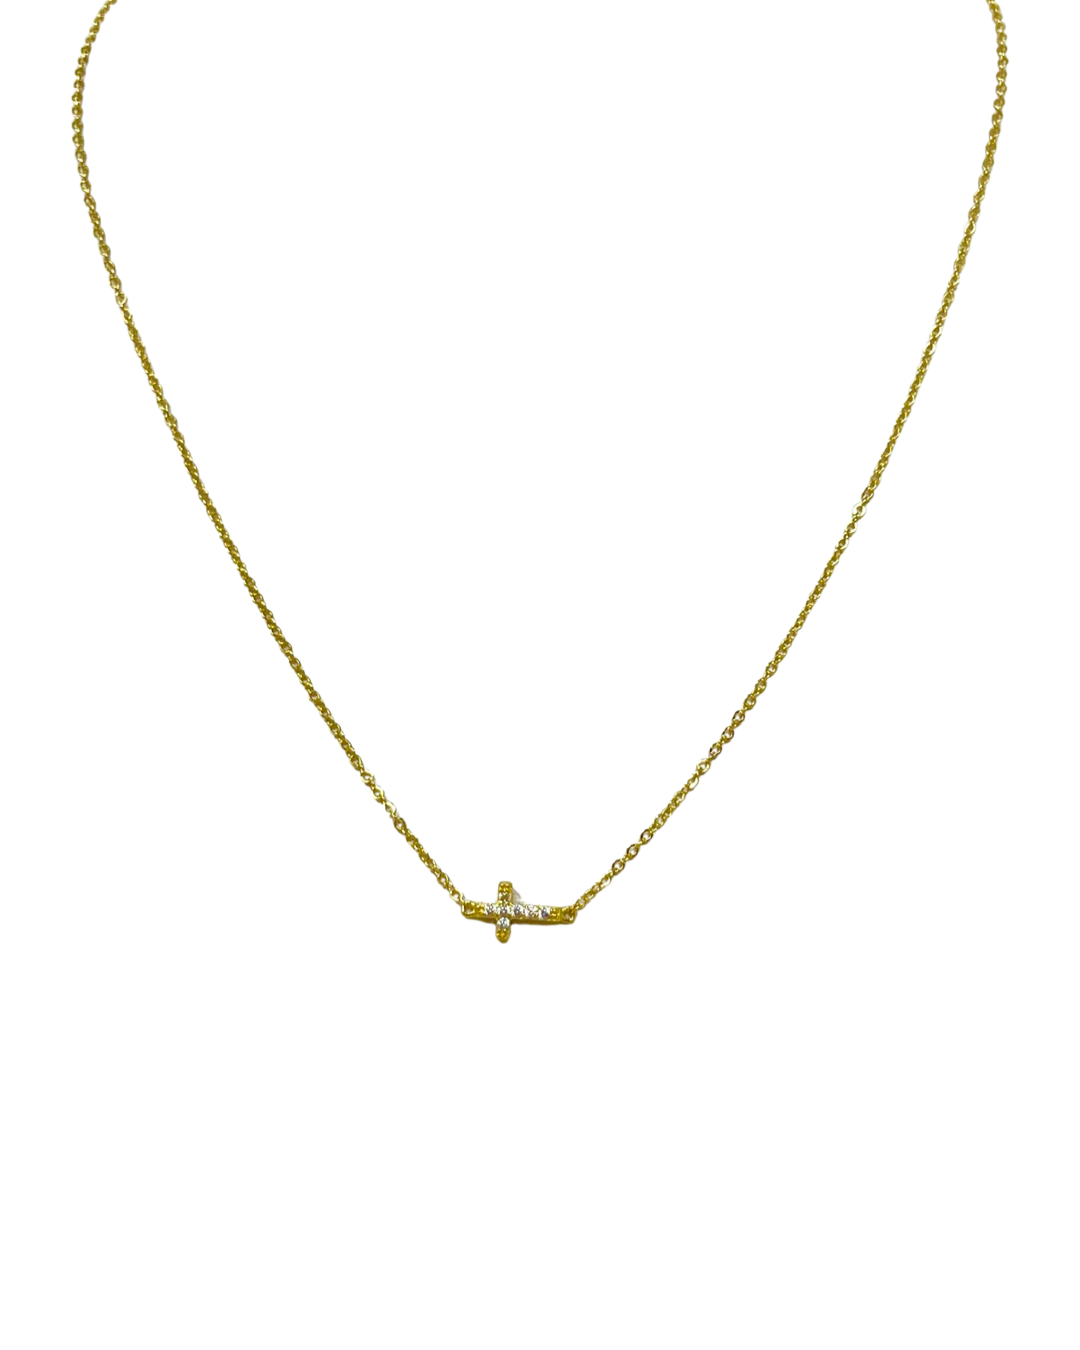 Pave Sideways Cross Necklace in Gold